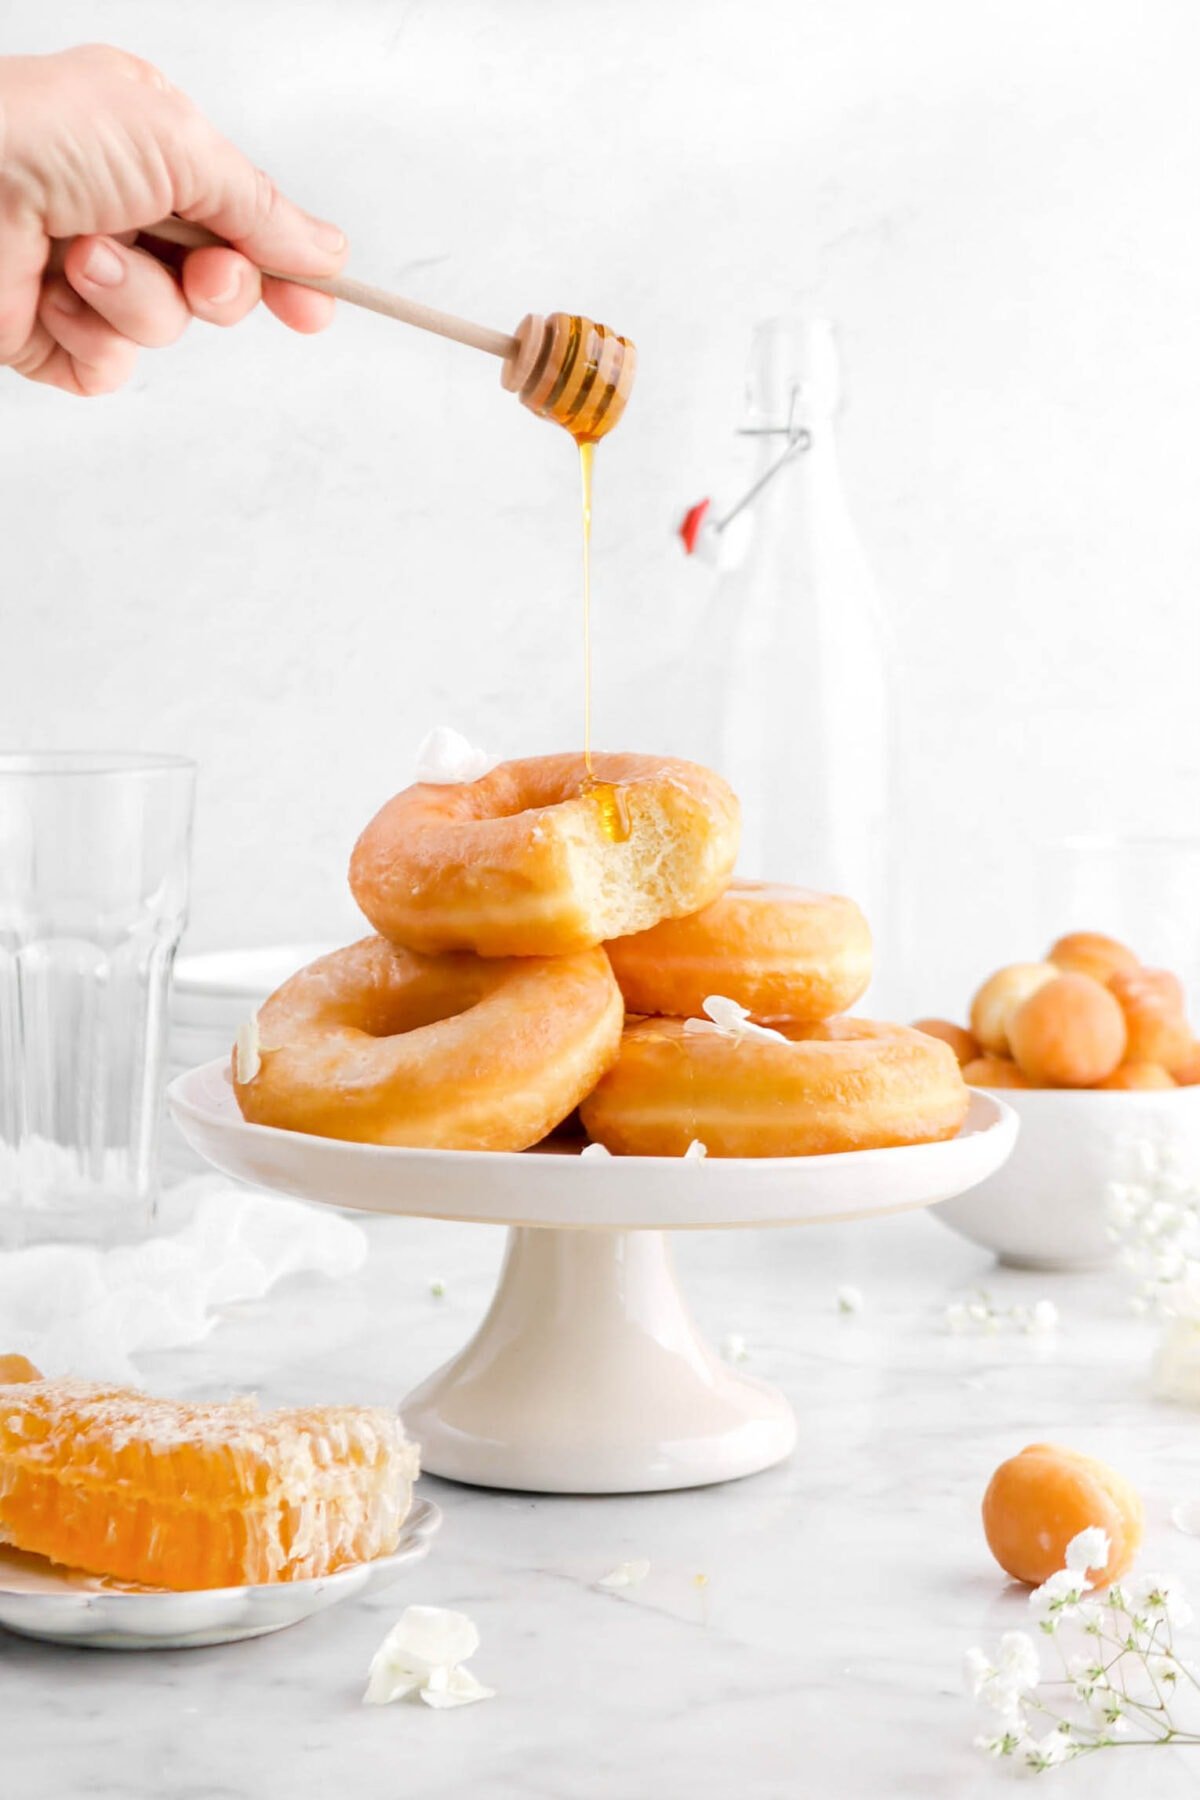 honey being drizzled onto stack of doughnuts with bite missing from top doughnut, flowers, and doughnut holes around and honey comb